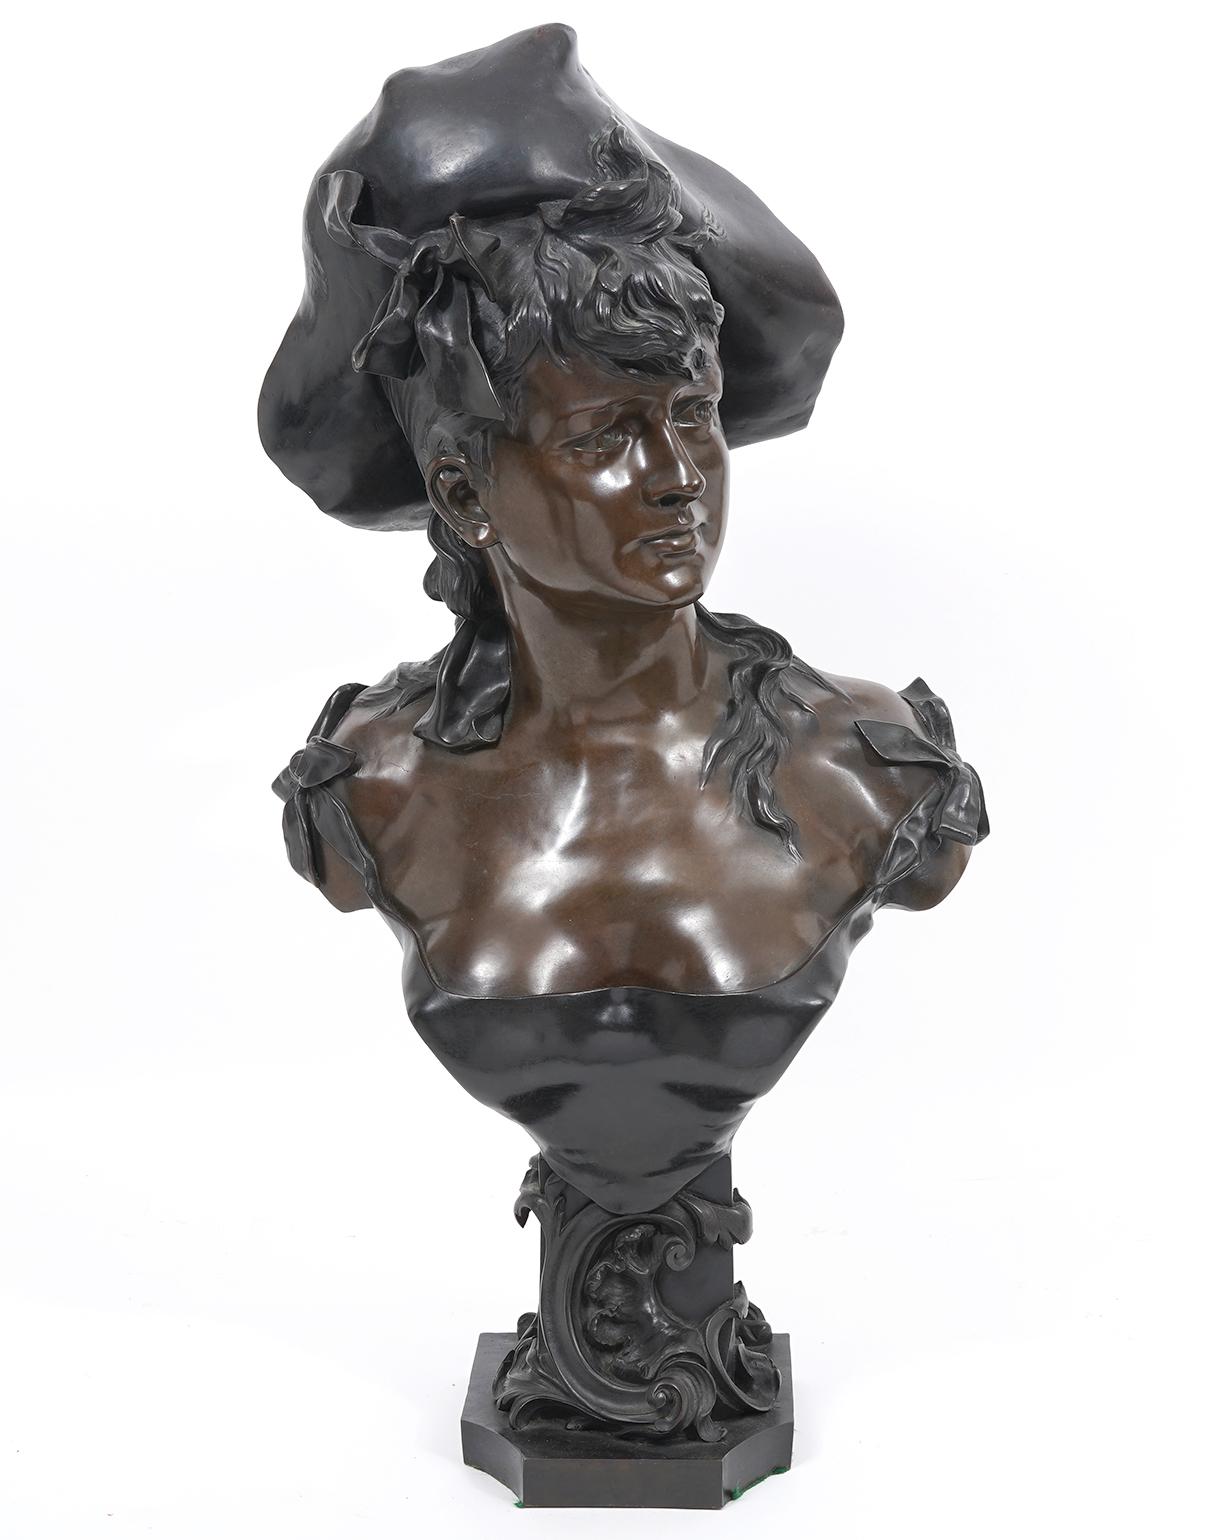 19th Century Art Nouveau Bronze Bust of a Girl in Louis XV Era Costume by Alfonse E. Nelson